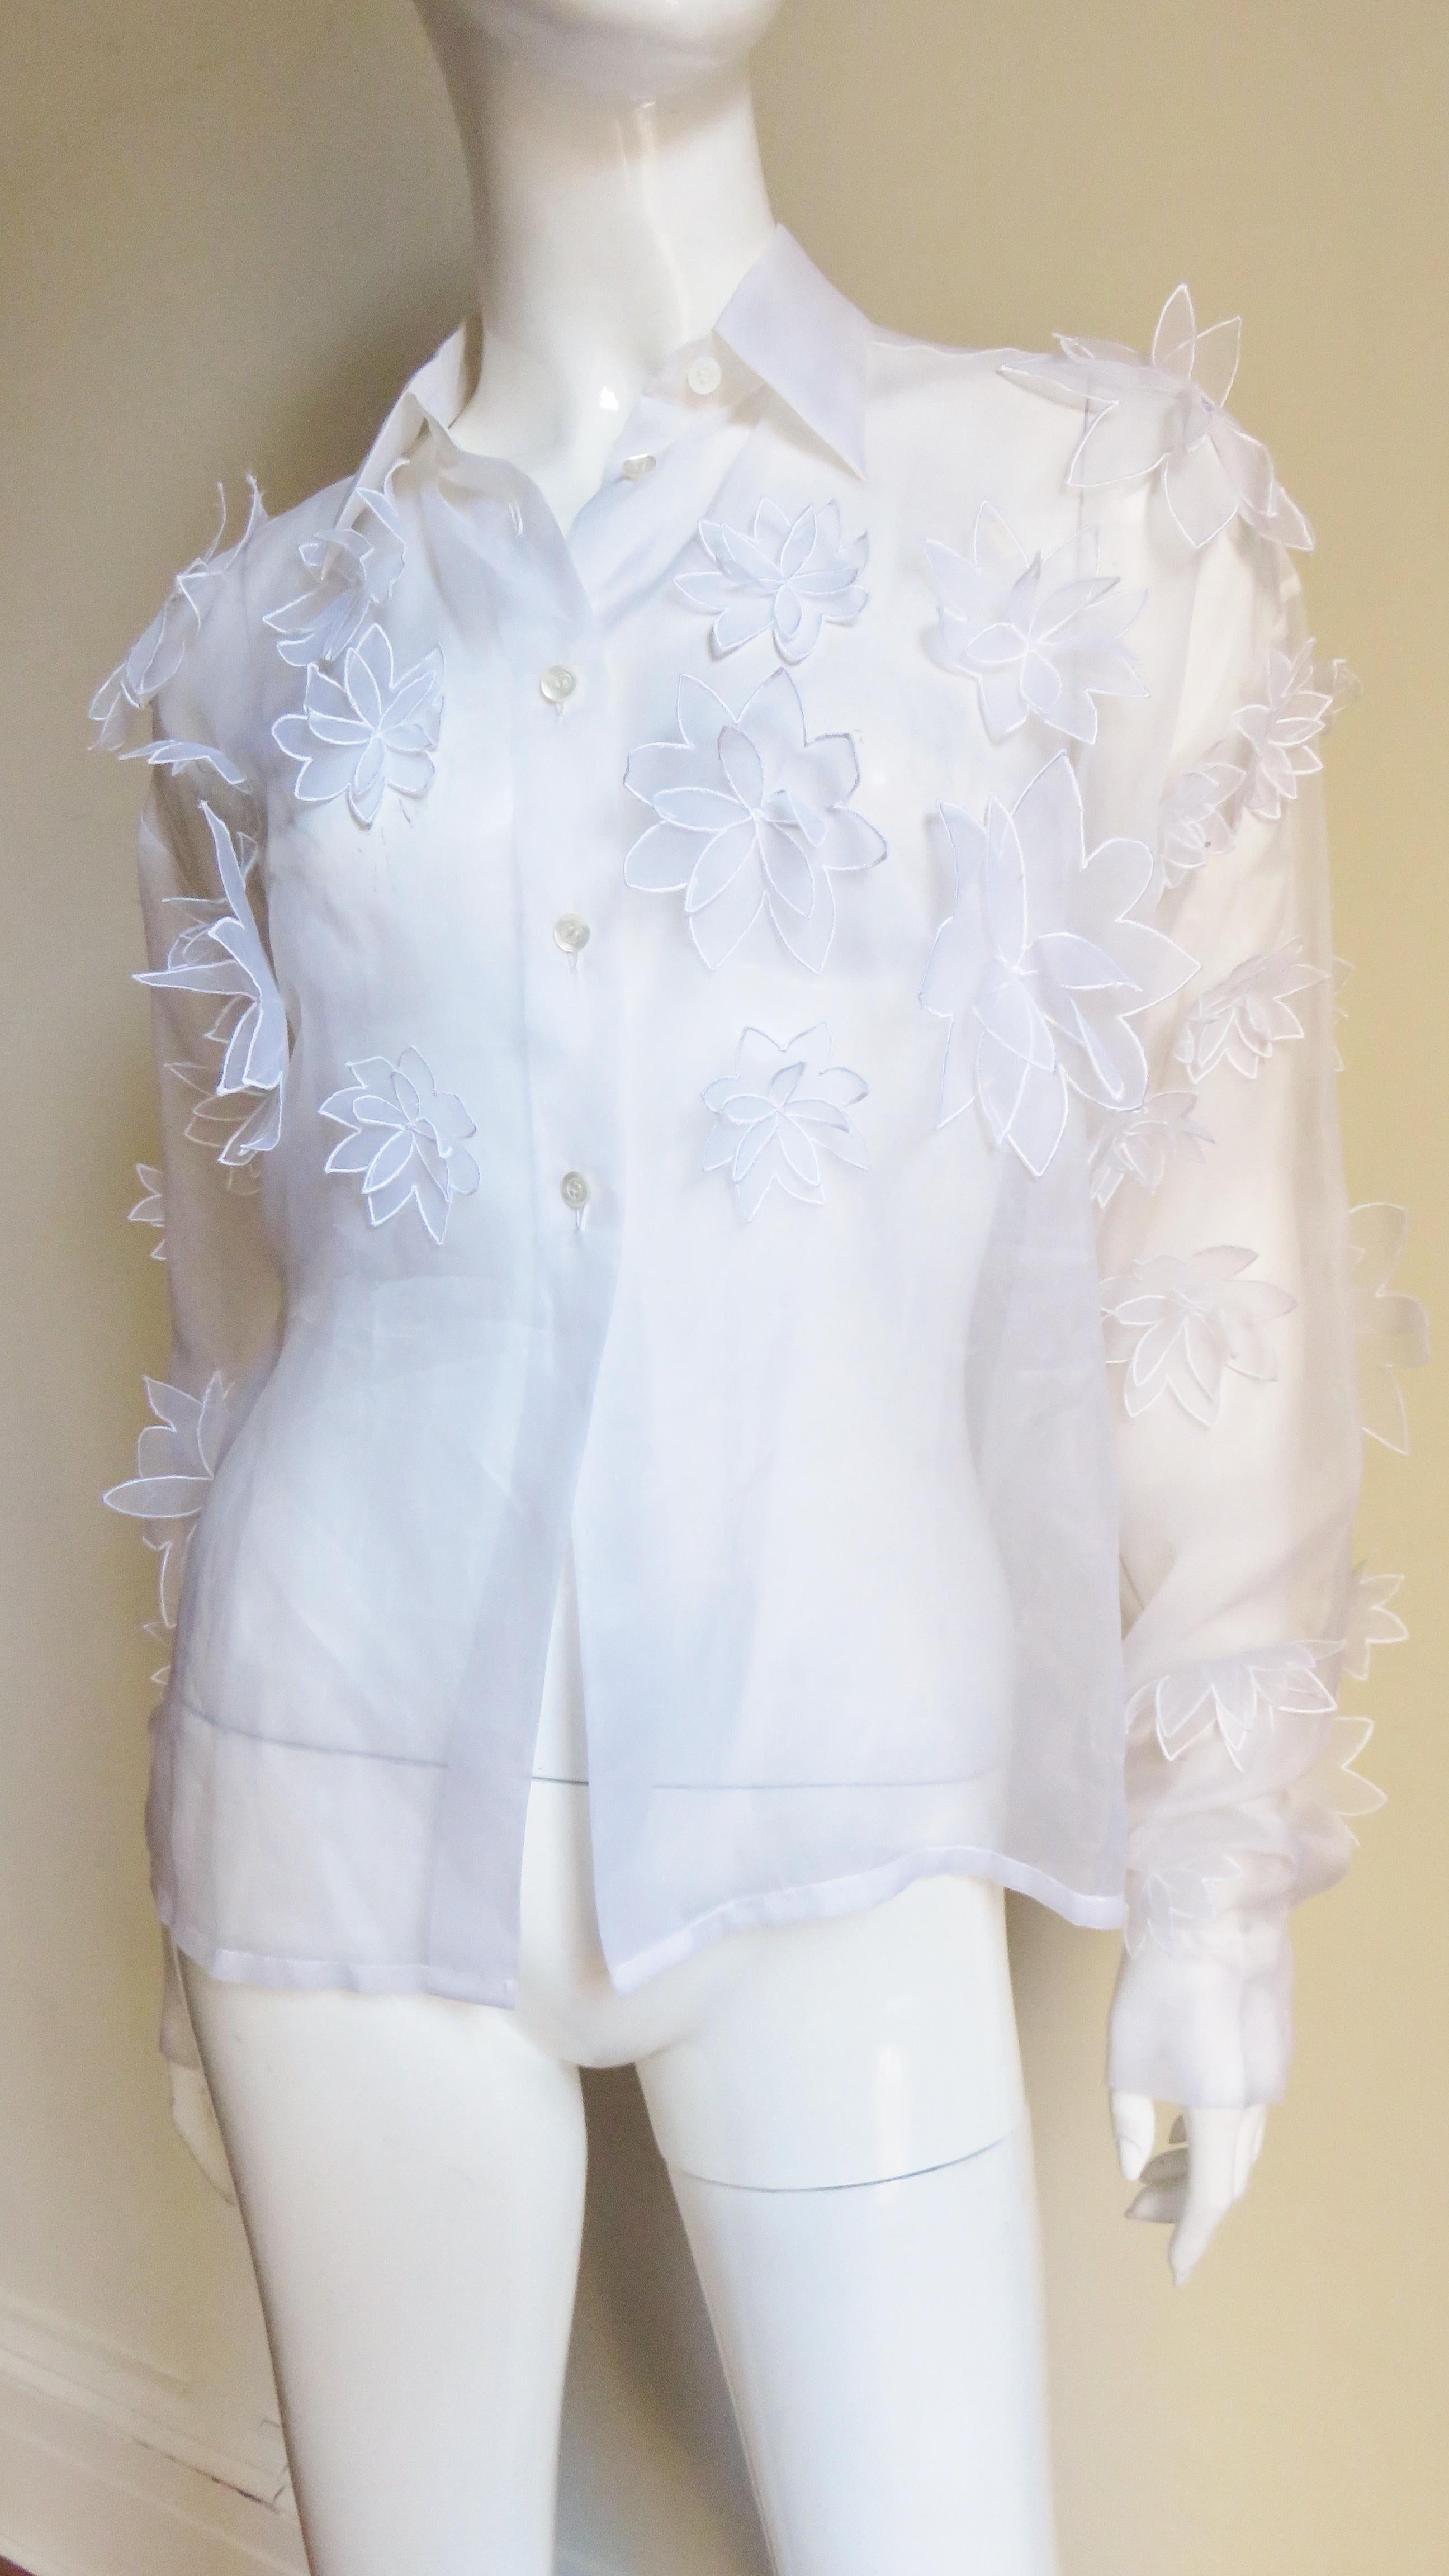 A stunning white semi sheer silk shirt, blouse from Dolce & Gabbana.  It has a shirt collar and long sleeves with button cuffs.  The sleeves, upper front and back are covered in appliques of layered varying sized flowers in the same fabric each